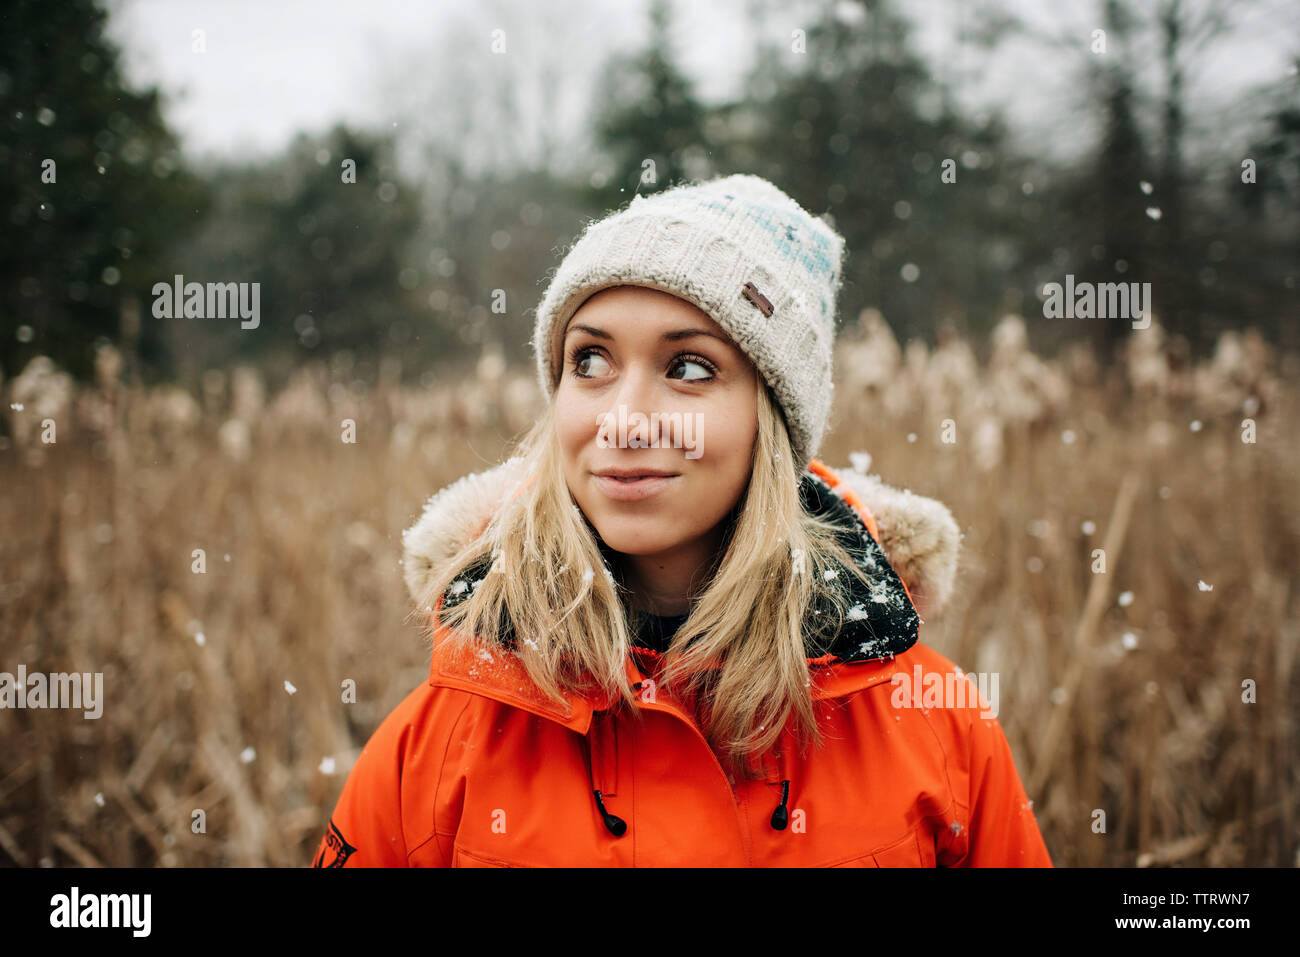 woman smiling standing in the snow with winter coat and hat Stock Photo